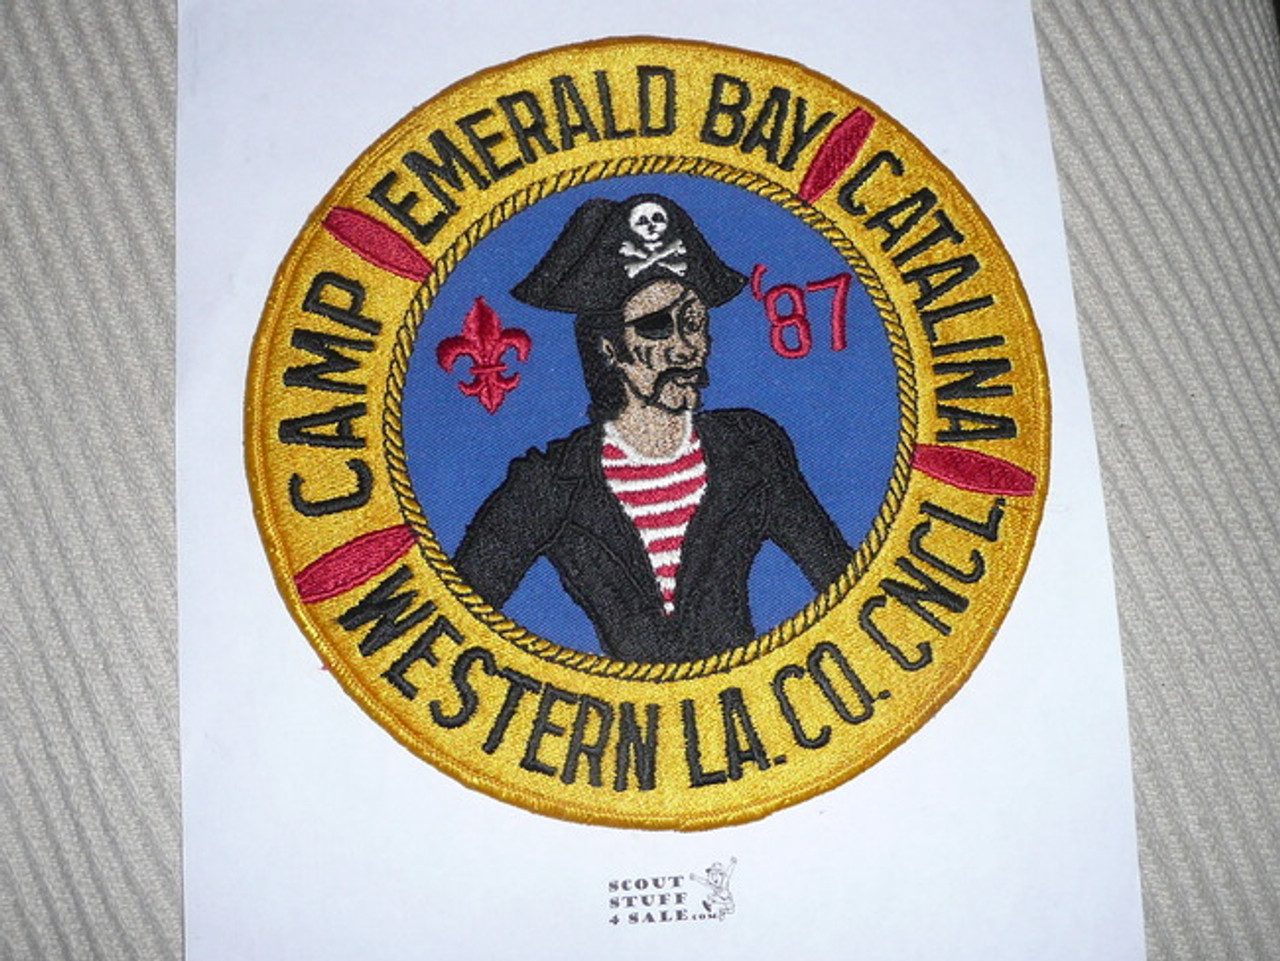 1987 Camp Emerald Bay Large Jacket Patch